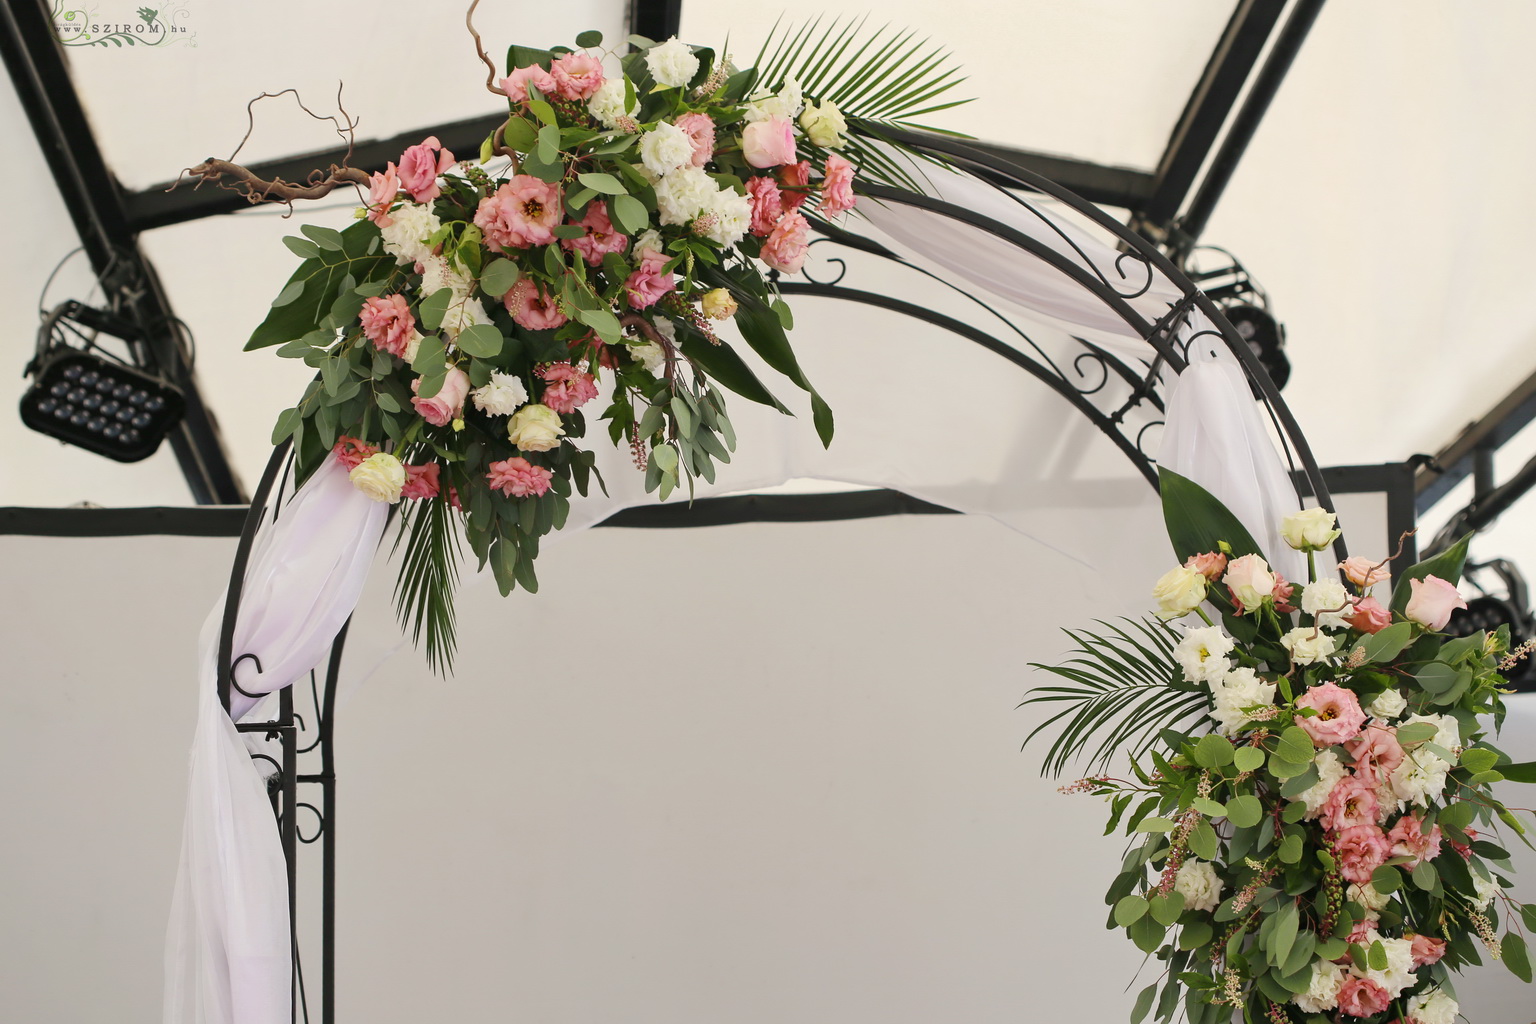 flower delivery Budapest - Wedding gate with asymmetrical decor, A38 Boat Budapest (lisianthus, rose, pink, white)